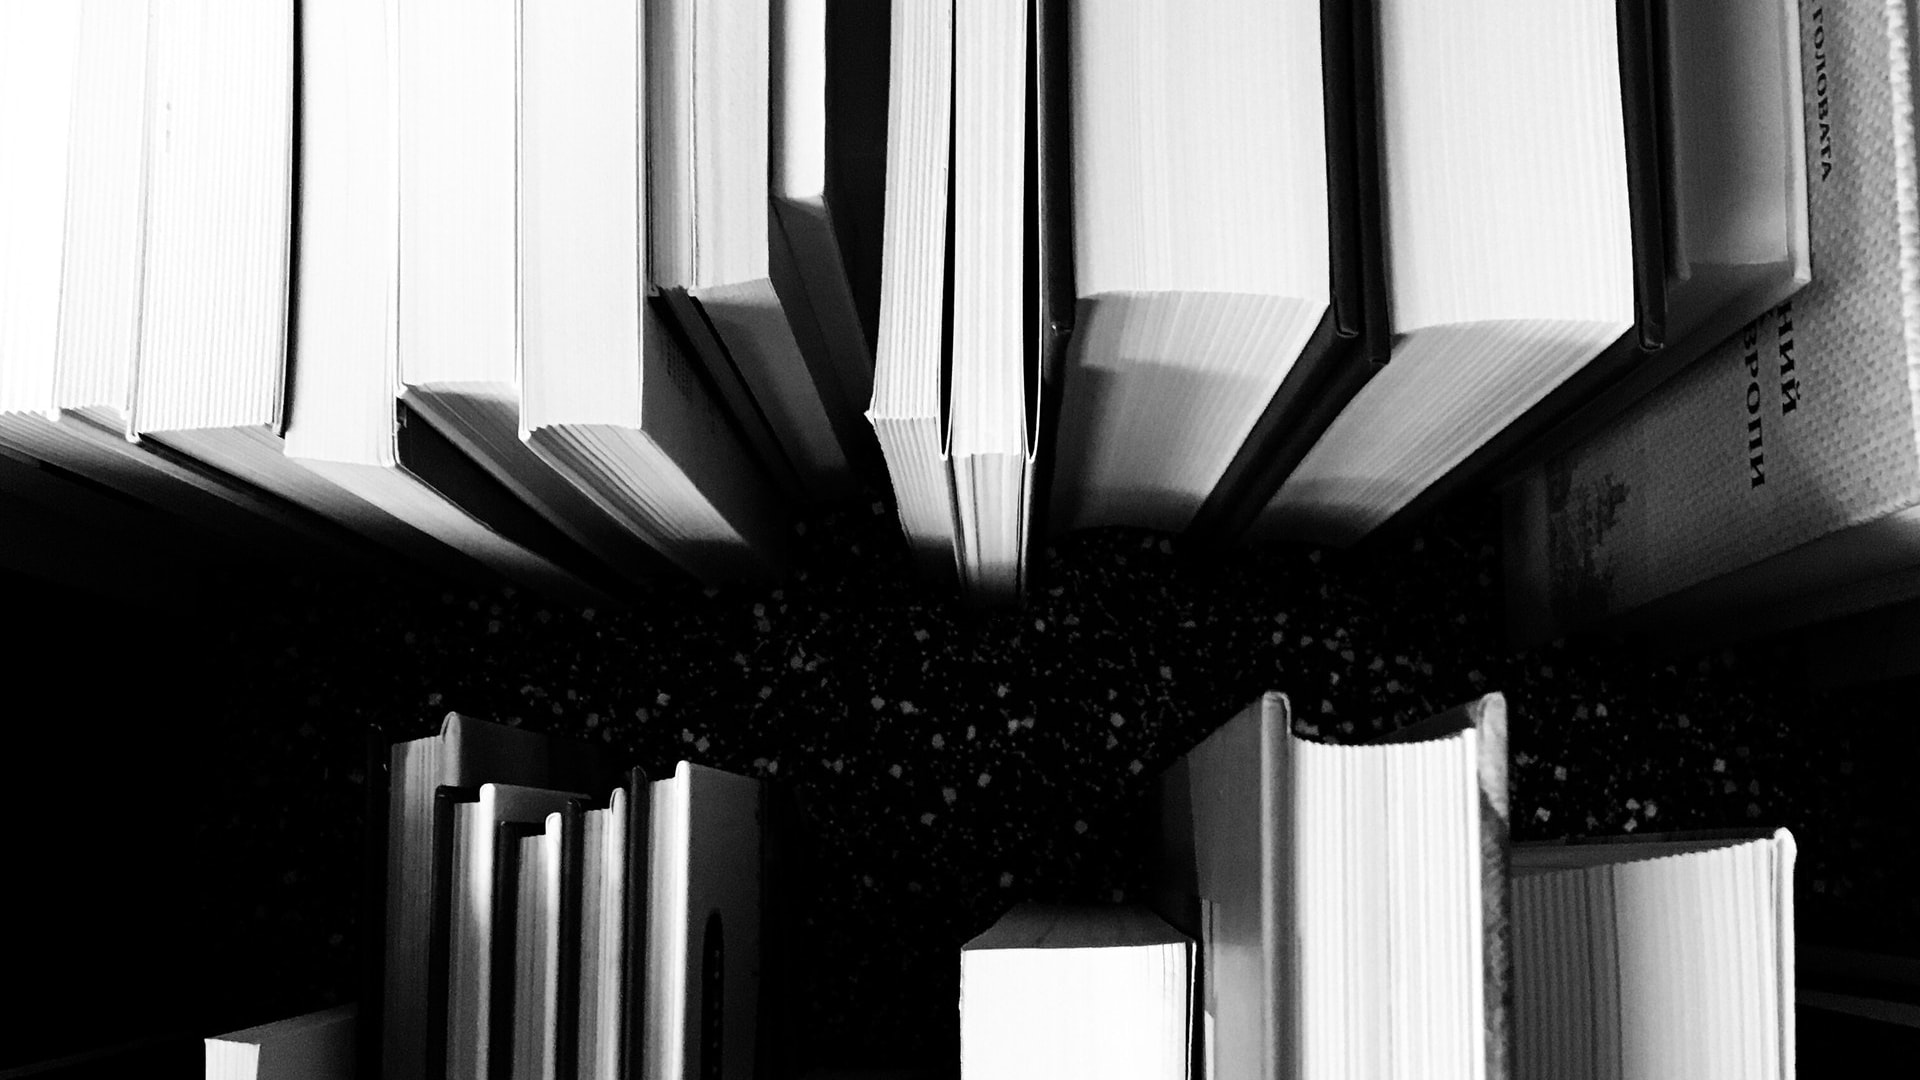 Monochromatic 45 degree angled birds eye view of books captured in shades of black and white